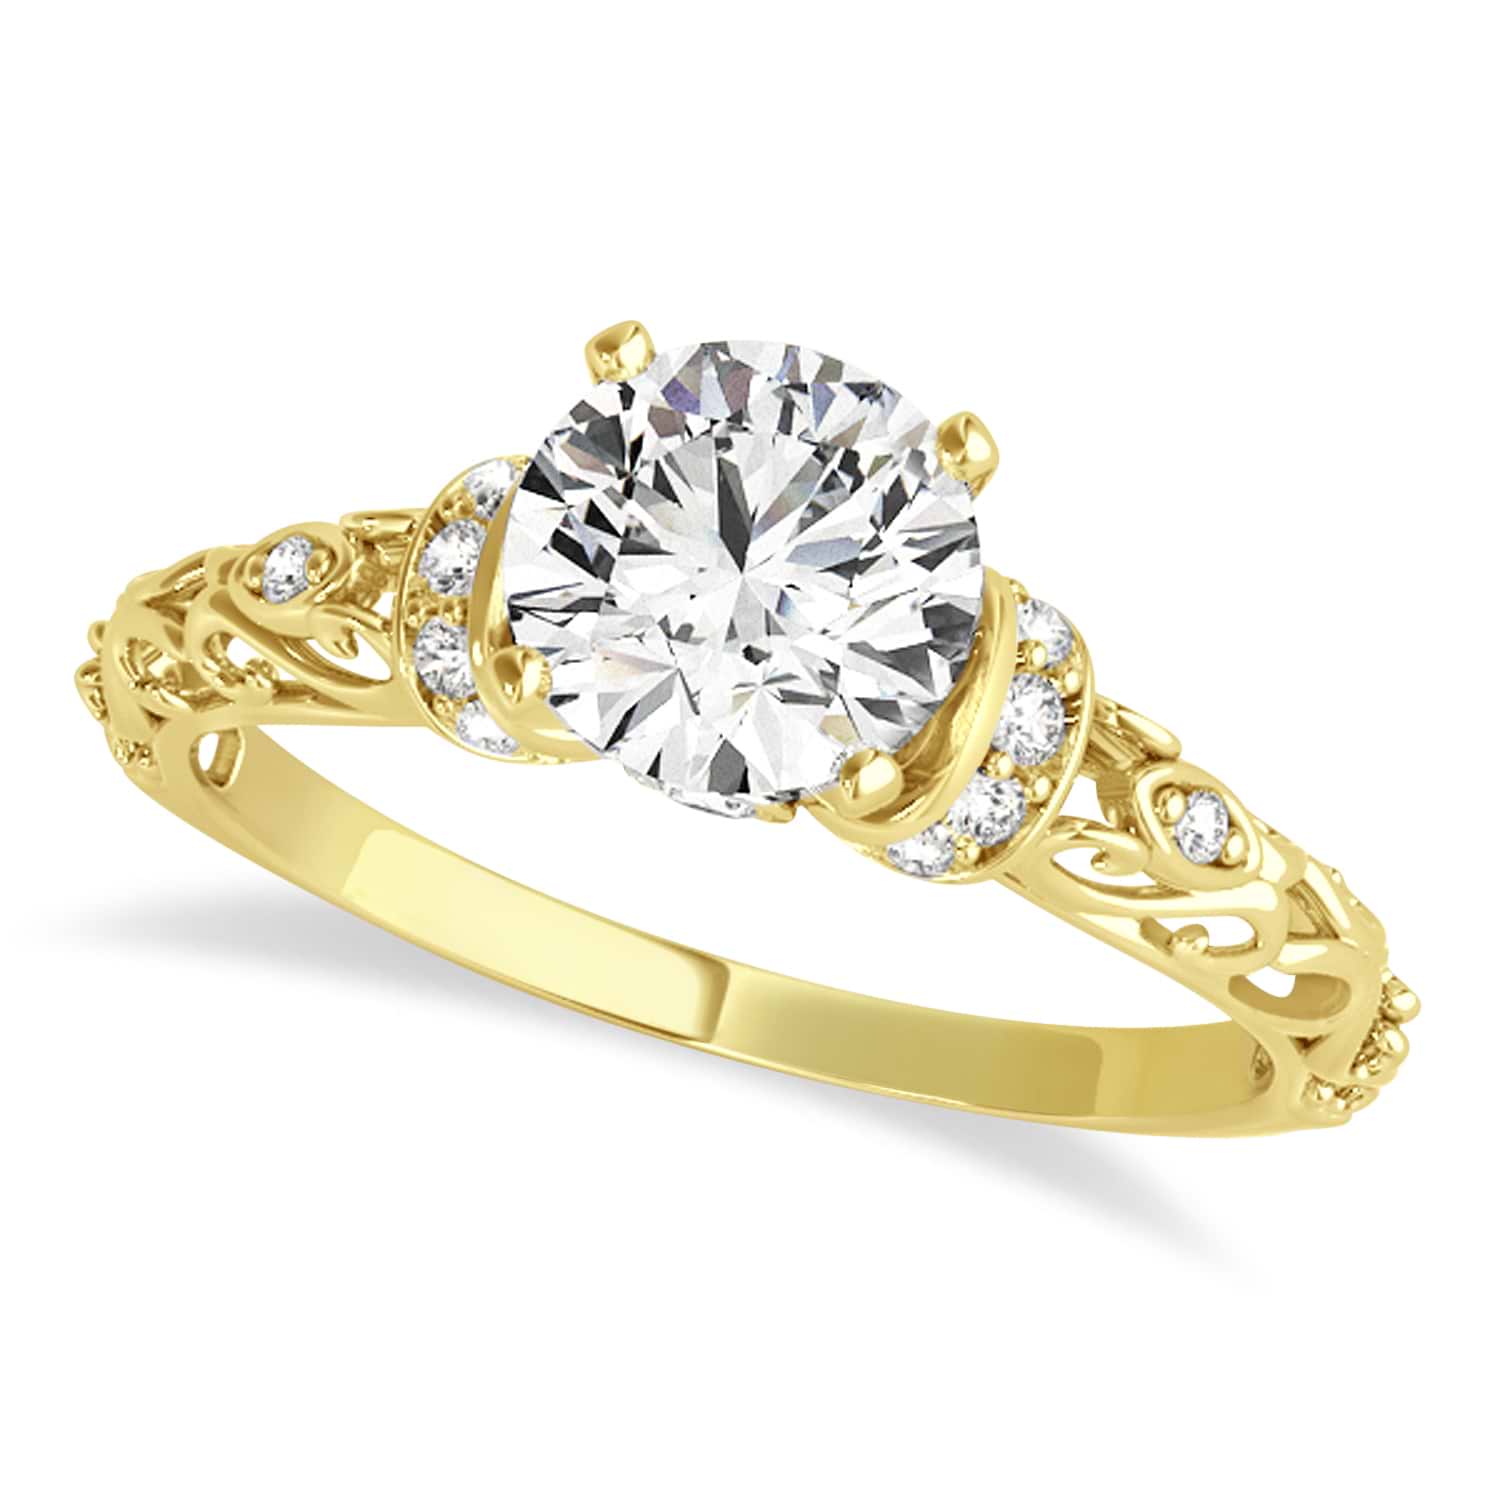 Diamond Antique Style Engagement Ring 18k Yellow Gold (0.87ct)